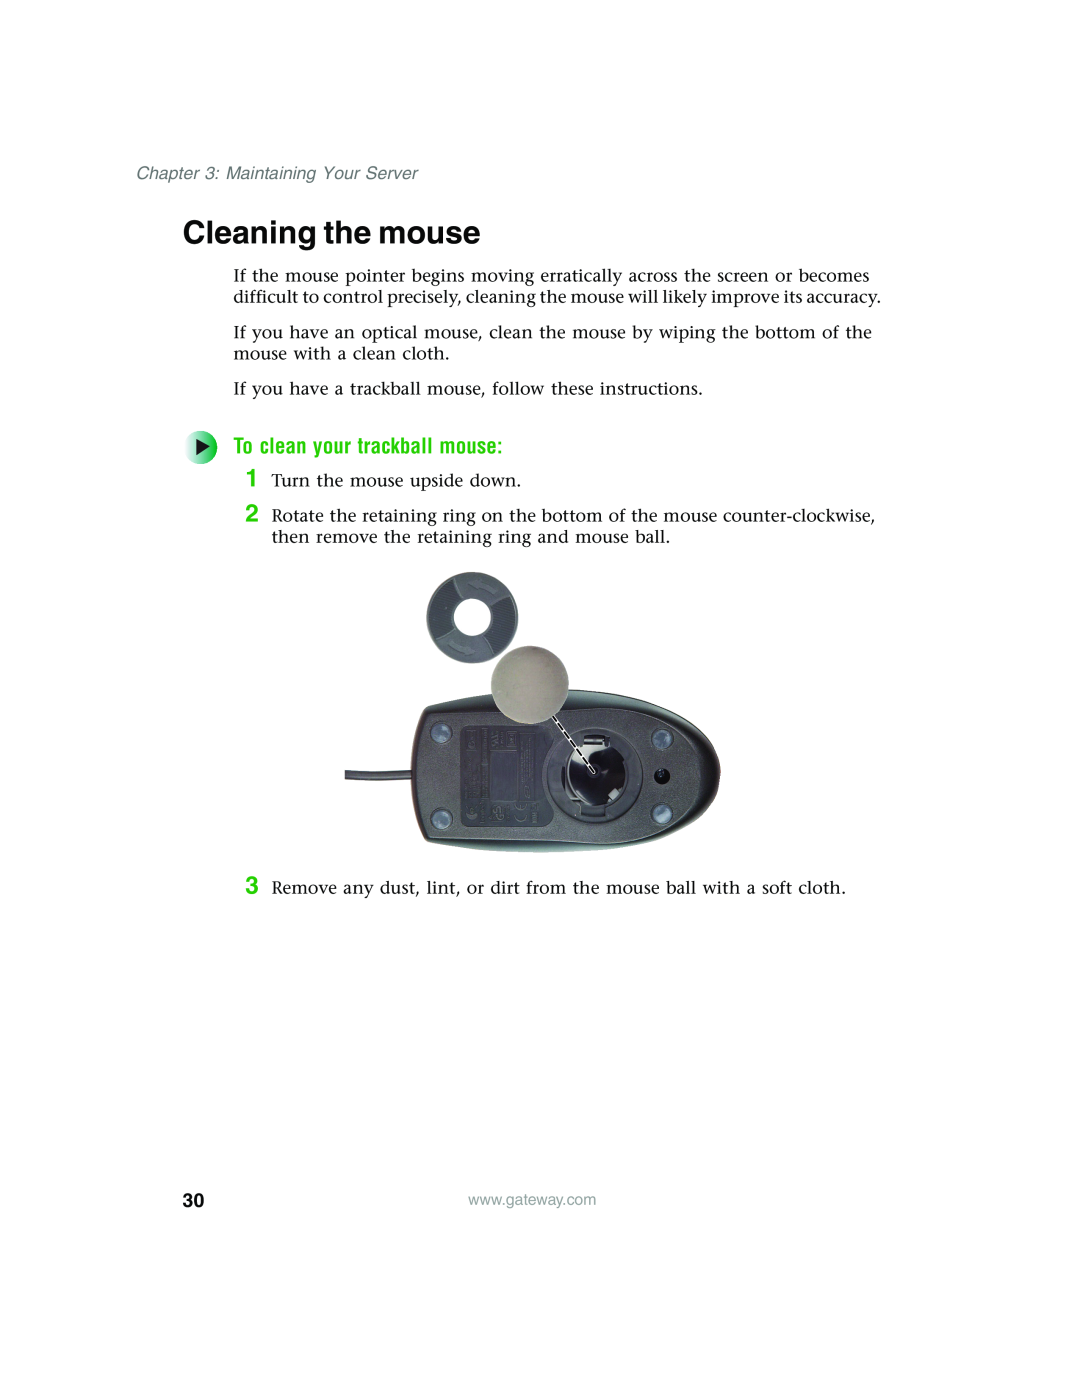 Gateway 960 manual Cleaning the mouse, To clean your trackball mouse, Maintaining Your Server 